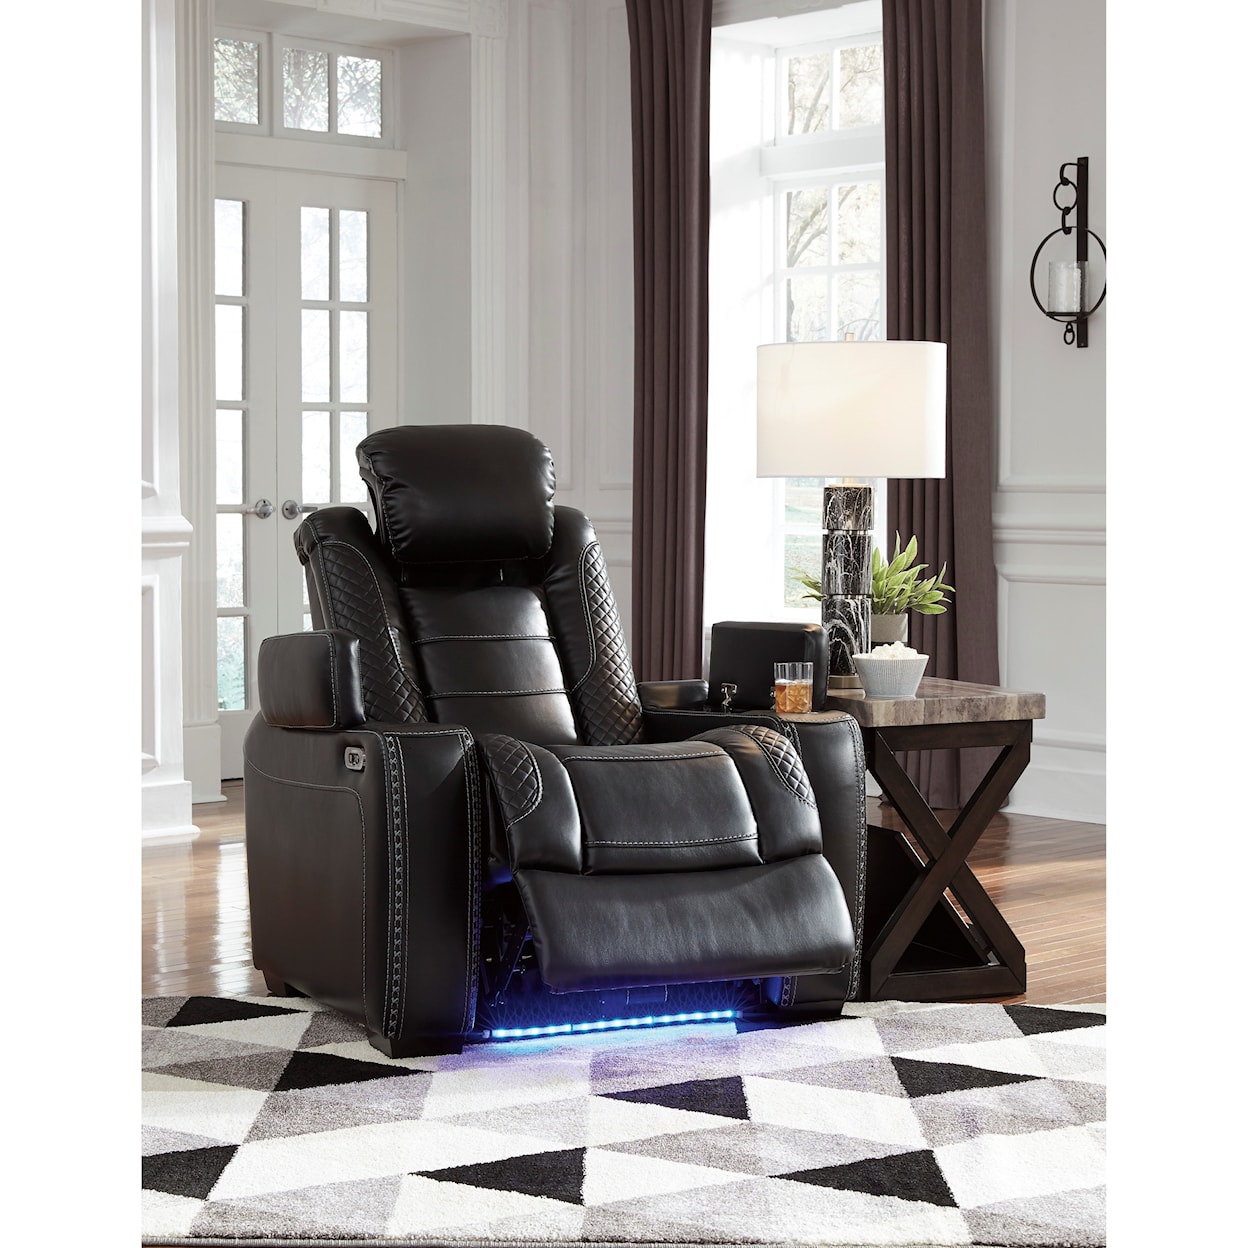 Michael Alan Select Party Time Power Recliner with Adjustable Headrest